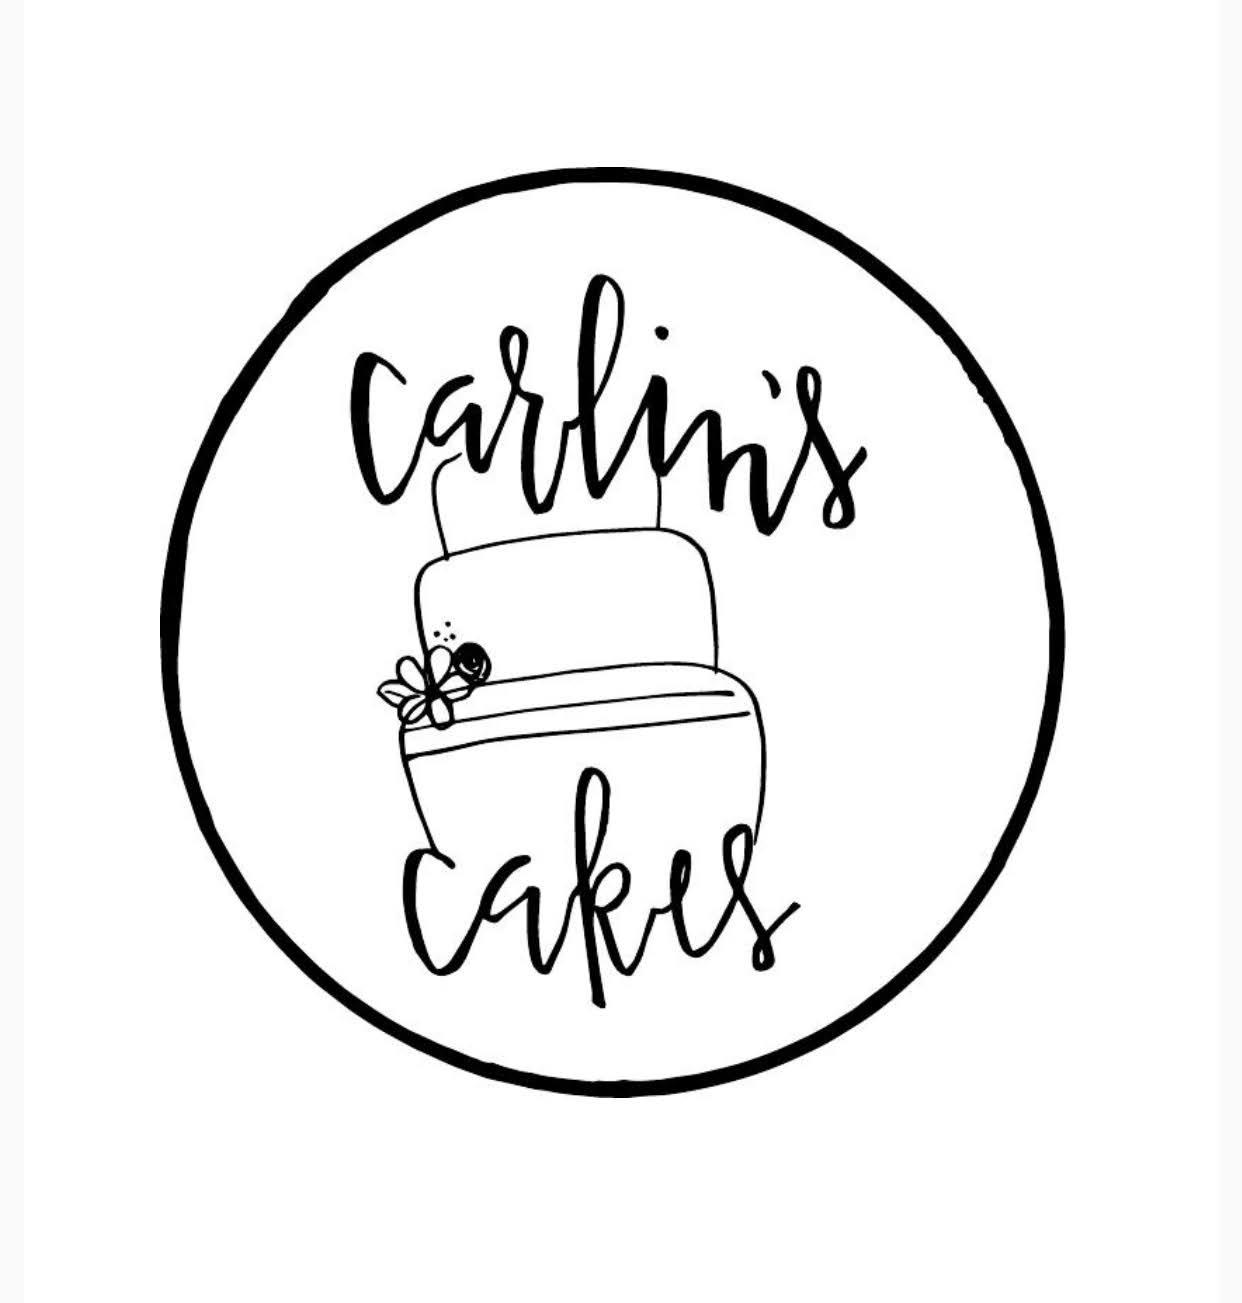 Carlins Cakes